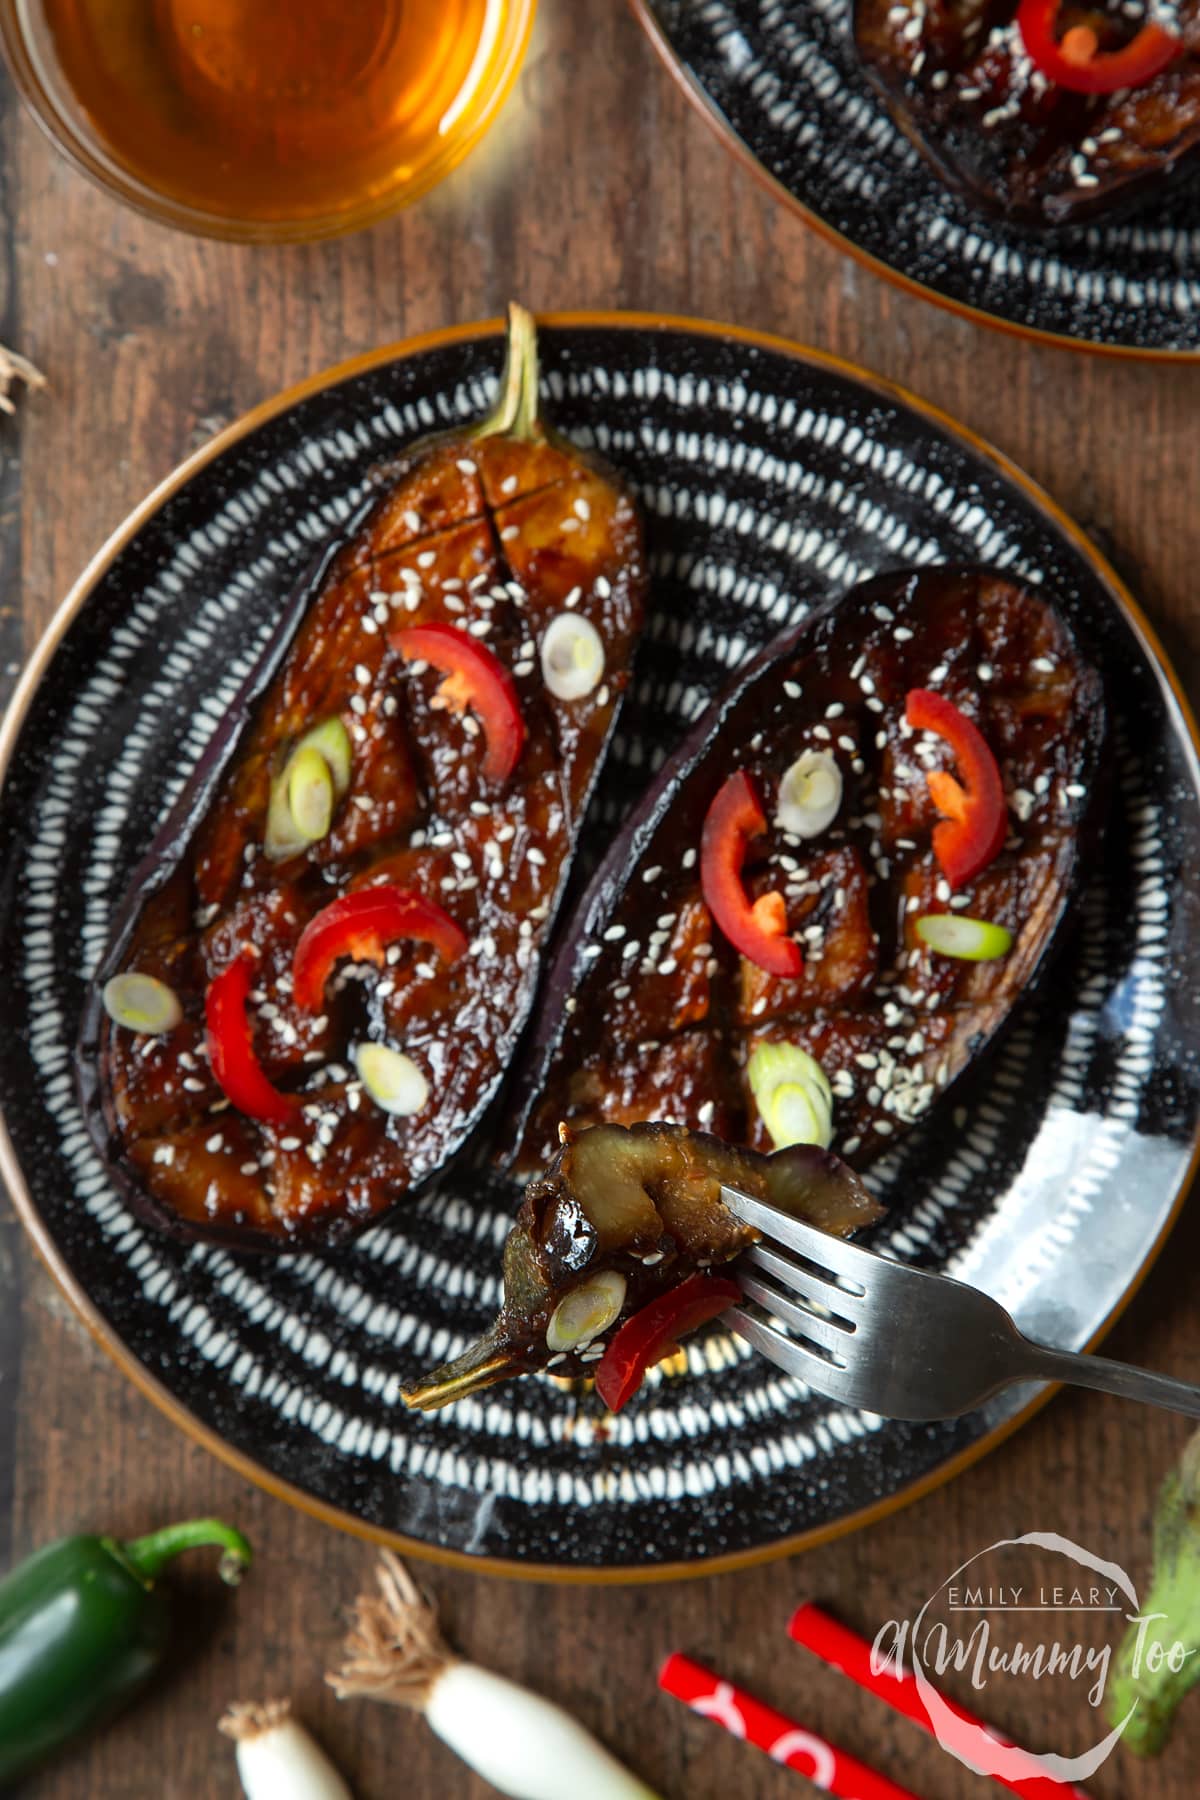 Two slices of miso aubergine on a plate, topped with chilli, springs onions and sesame seeds. A fork holds a piece.